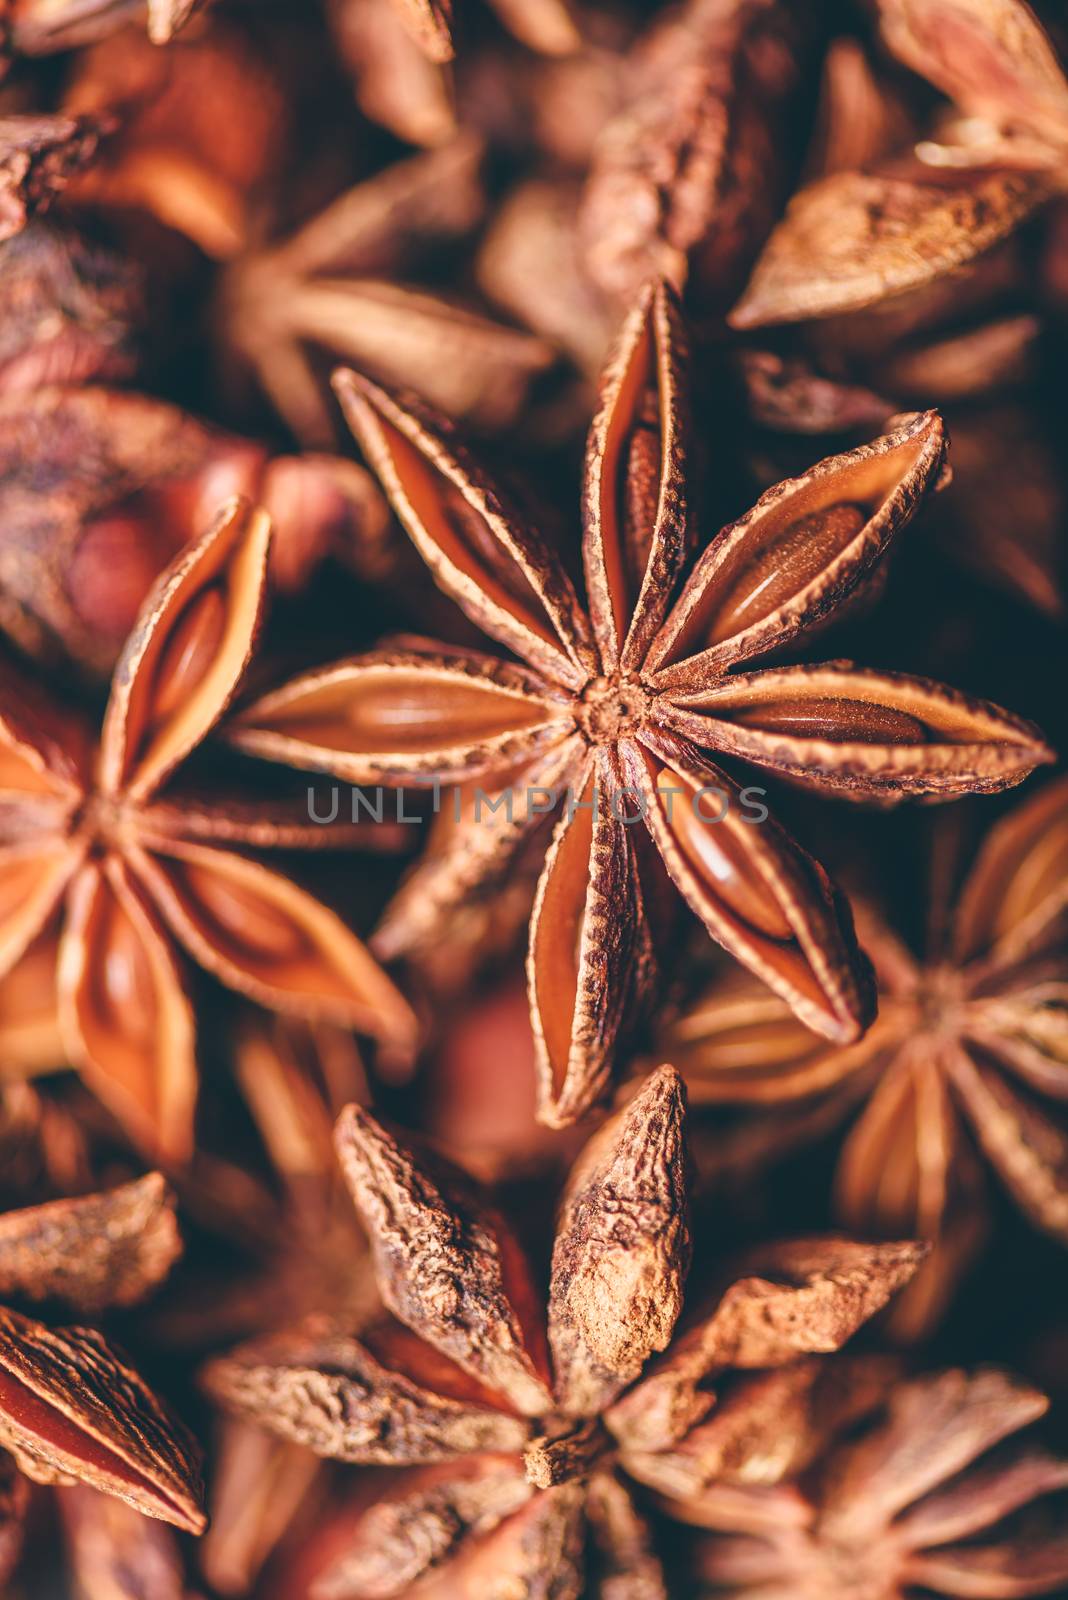 Backdrop of Star Anise Fruits and Seeds. Vertical Orientation.